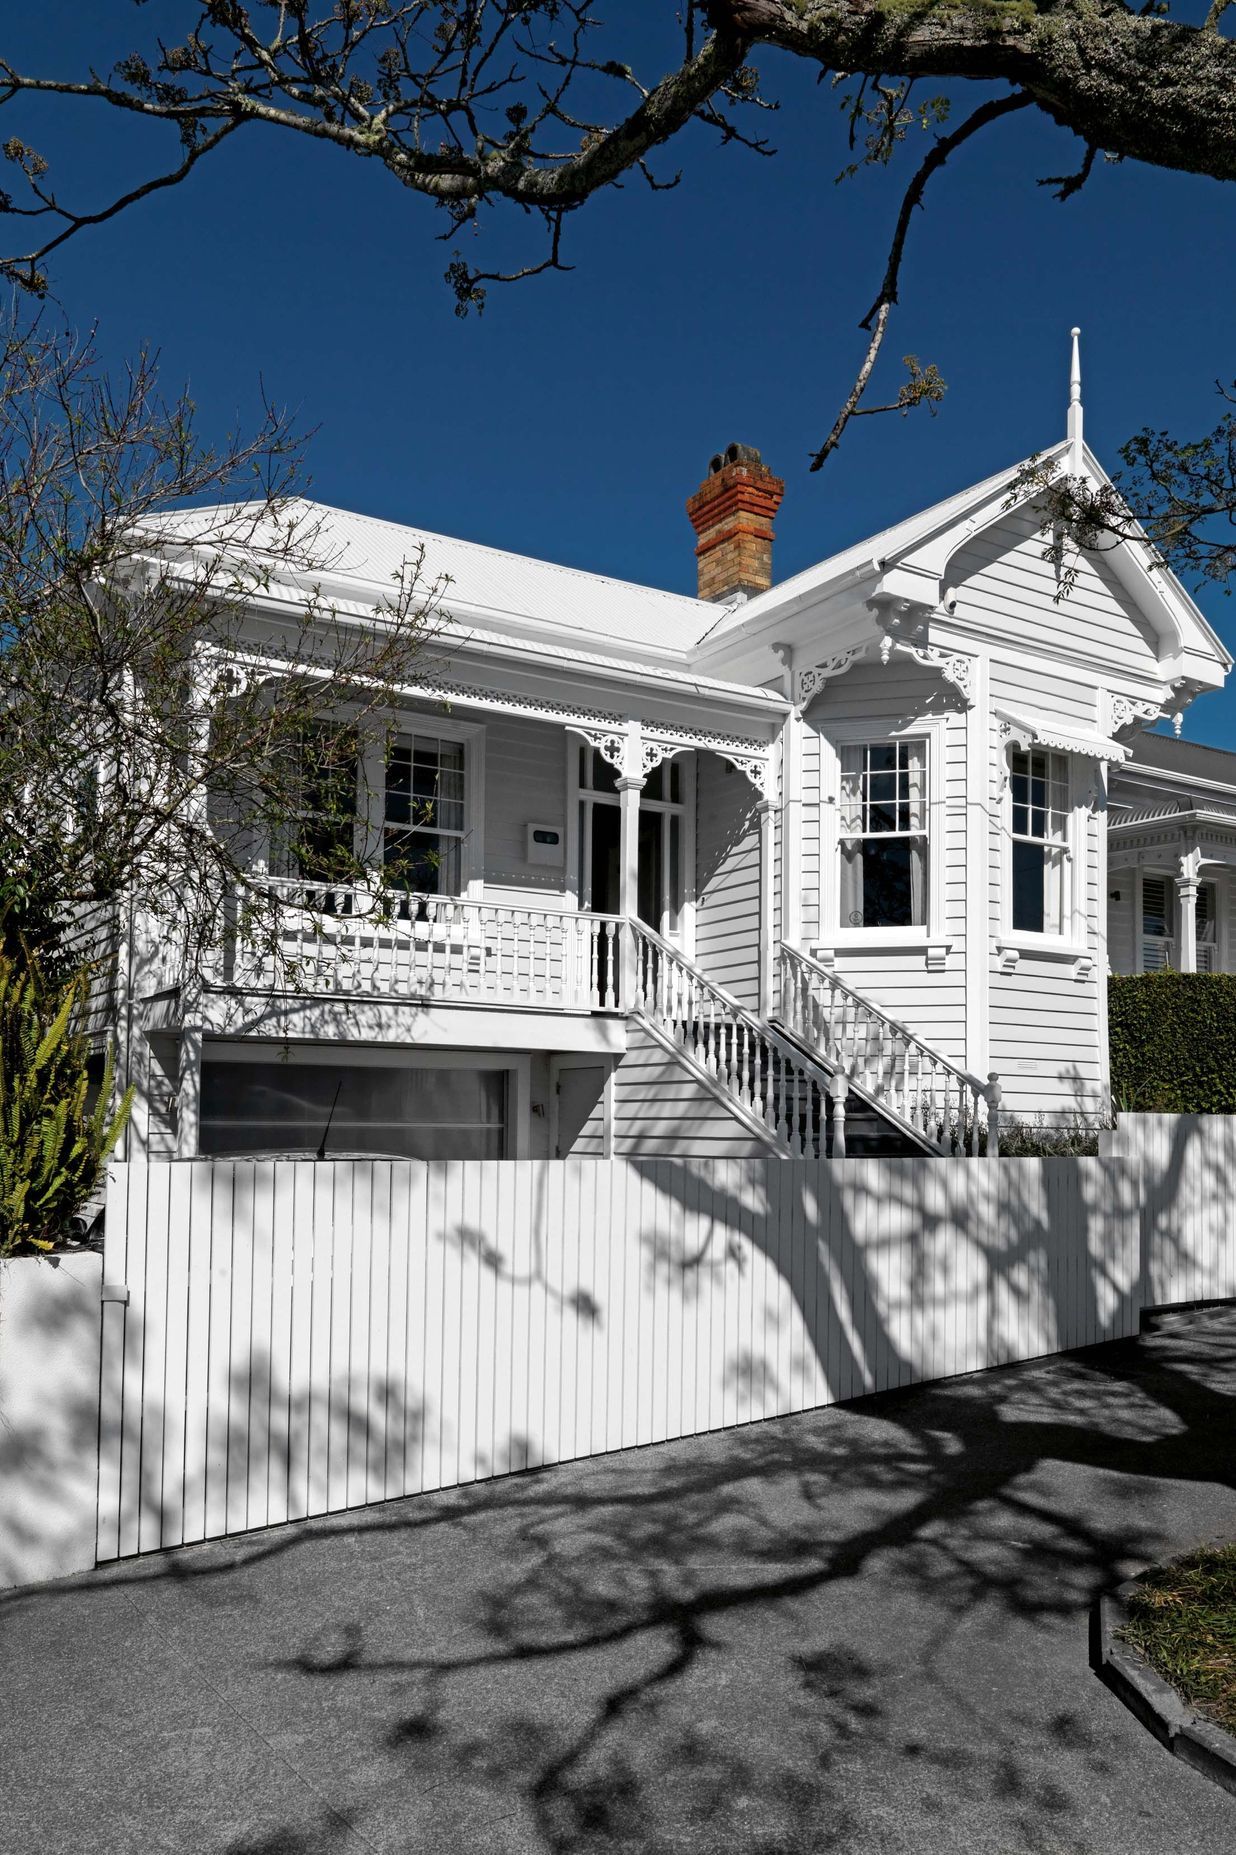 The front elevation is a classic Ponsonby villa with a bay window and verandah – looking fresh and crisp painted all in white.